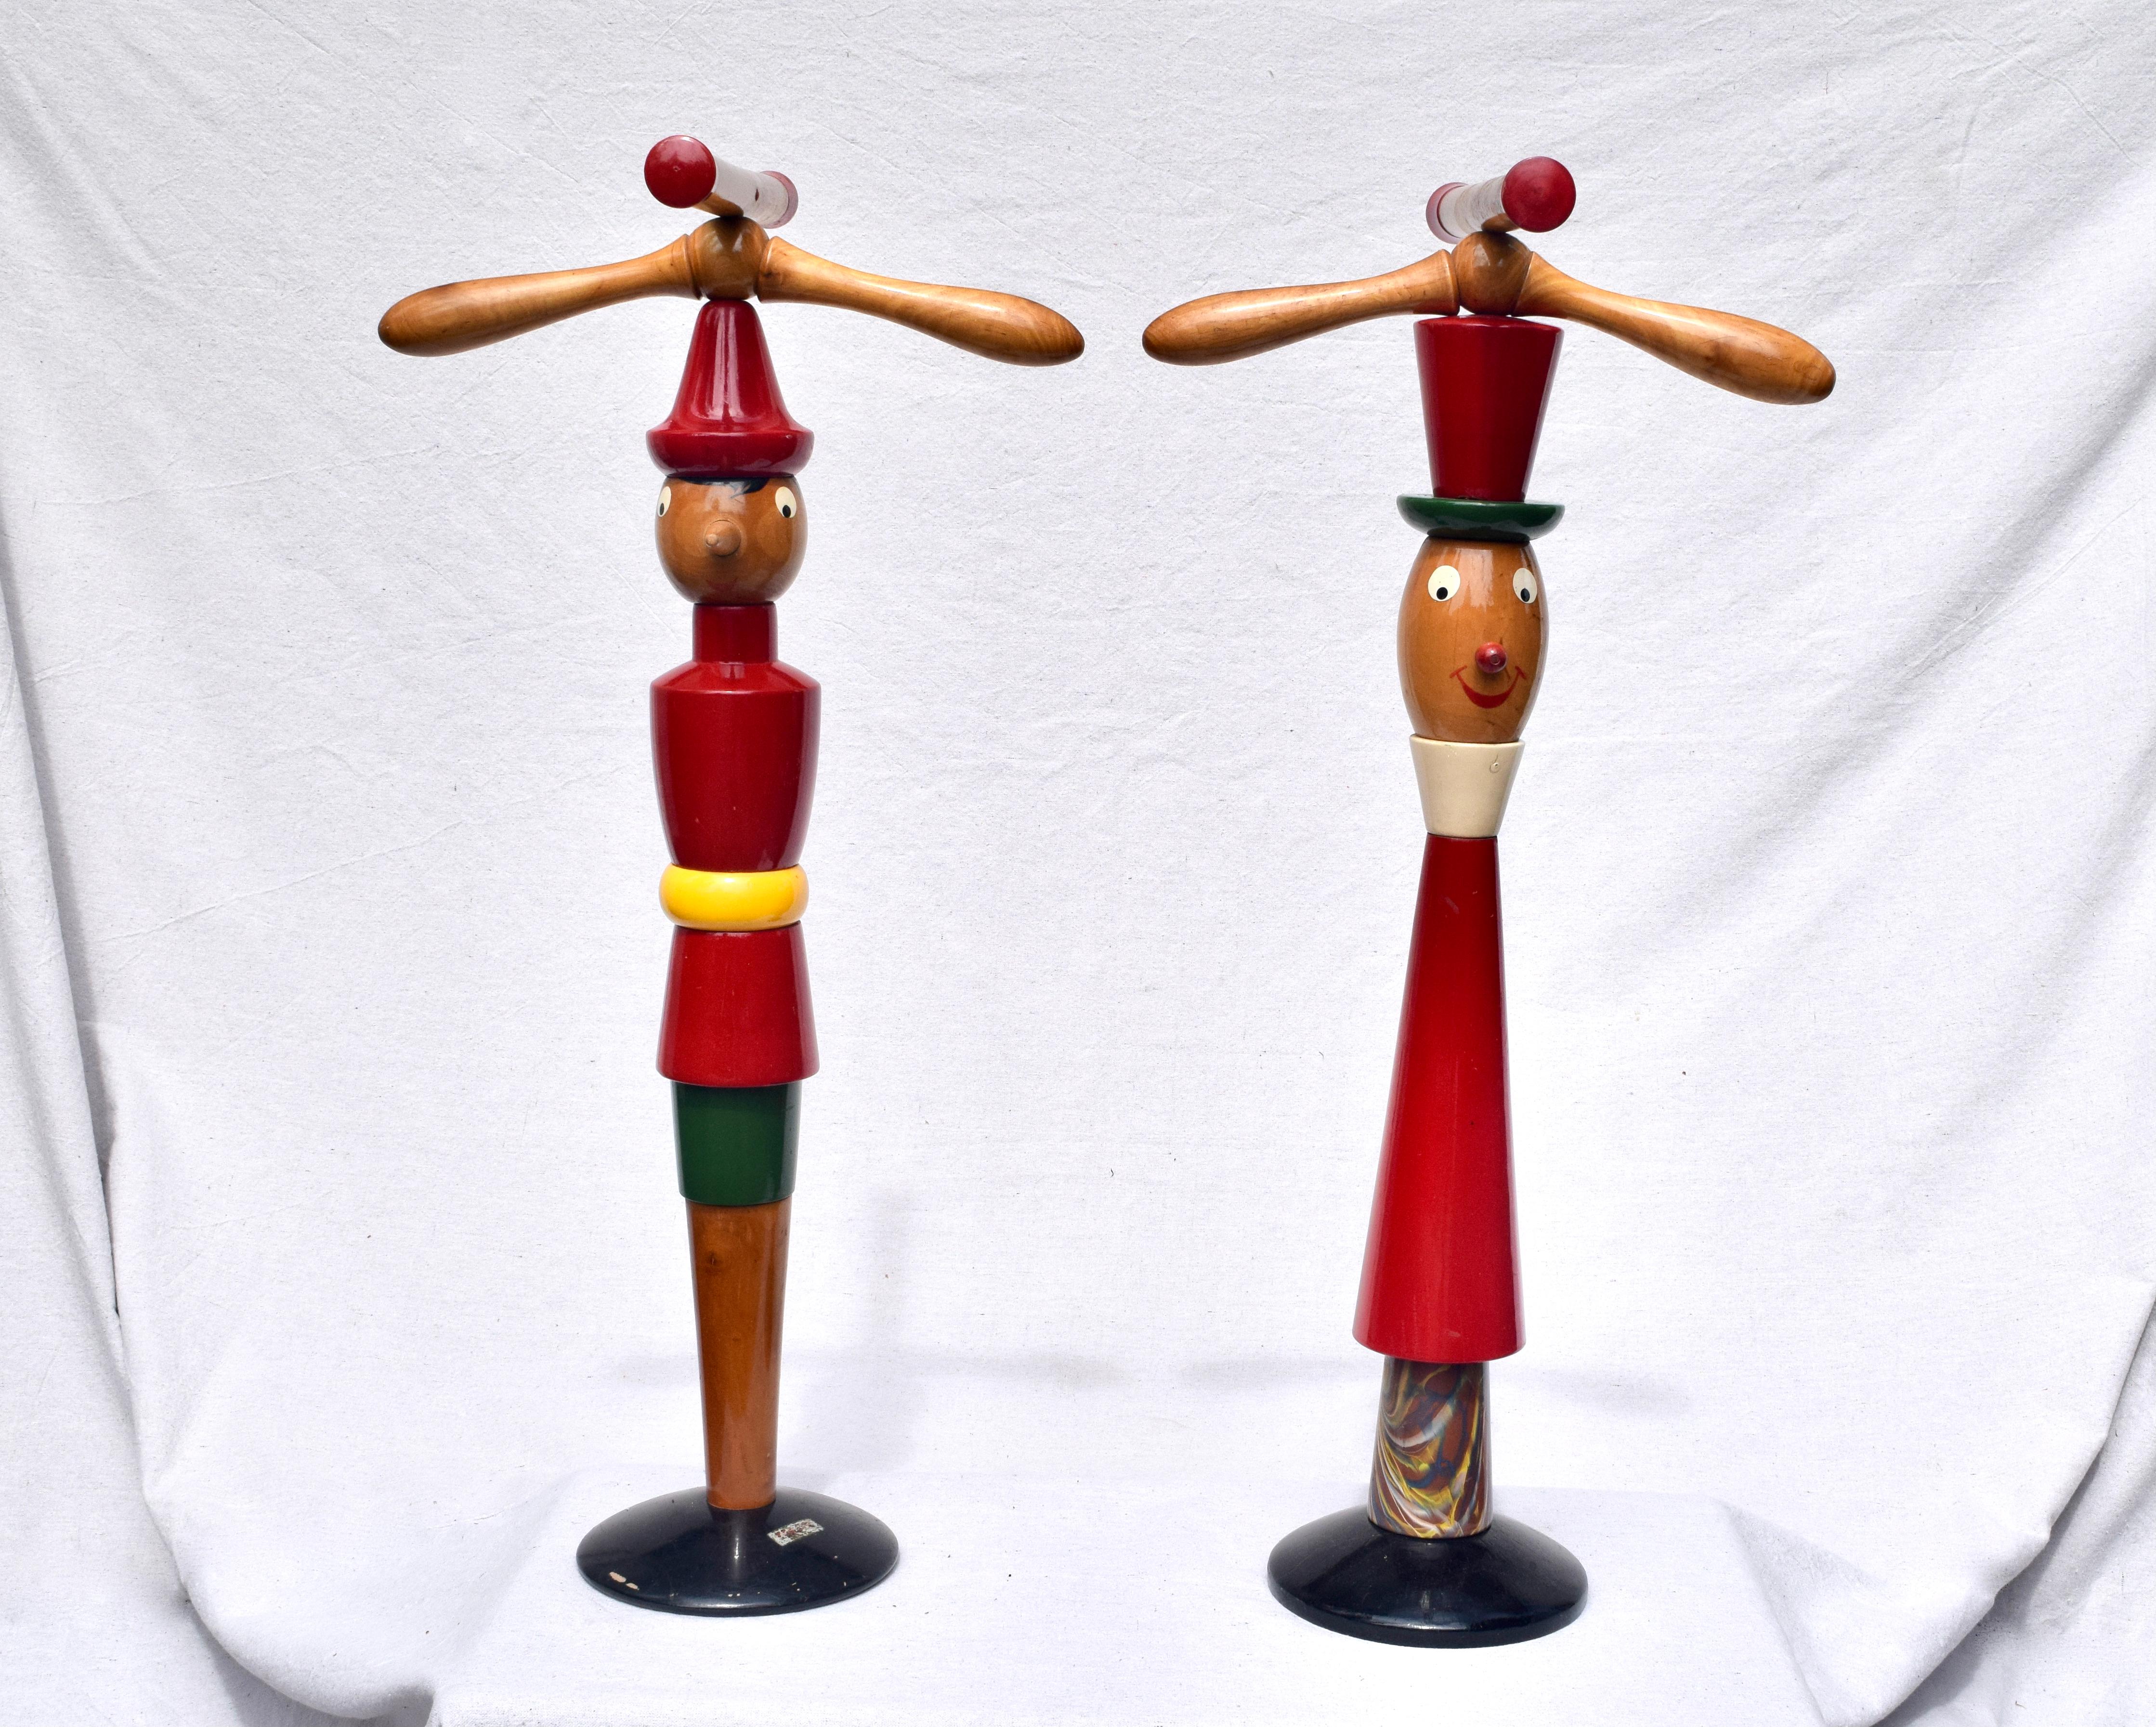 Maple Valet Stands Pinocchio & Jiminy Cricket, 1940s Italian Design For Sale